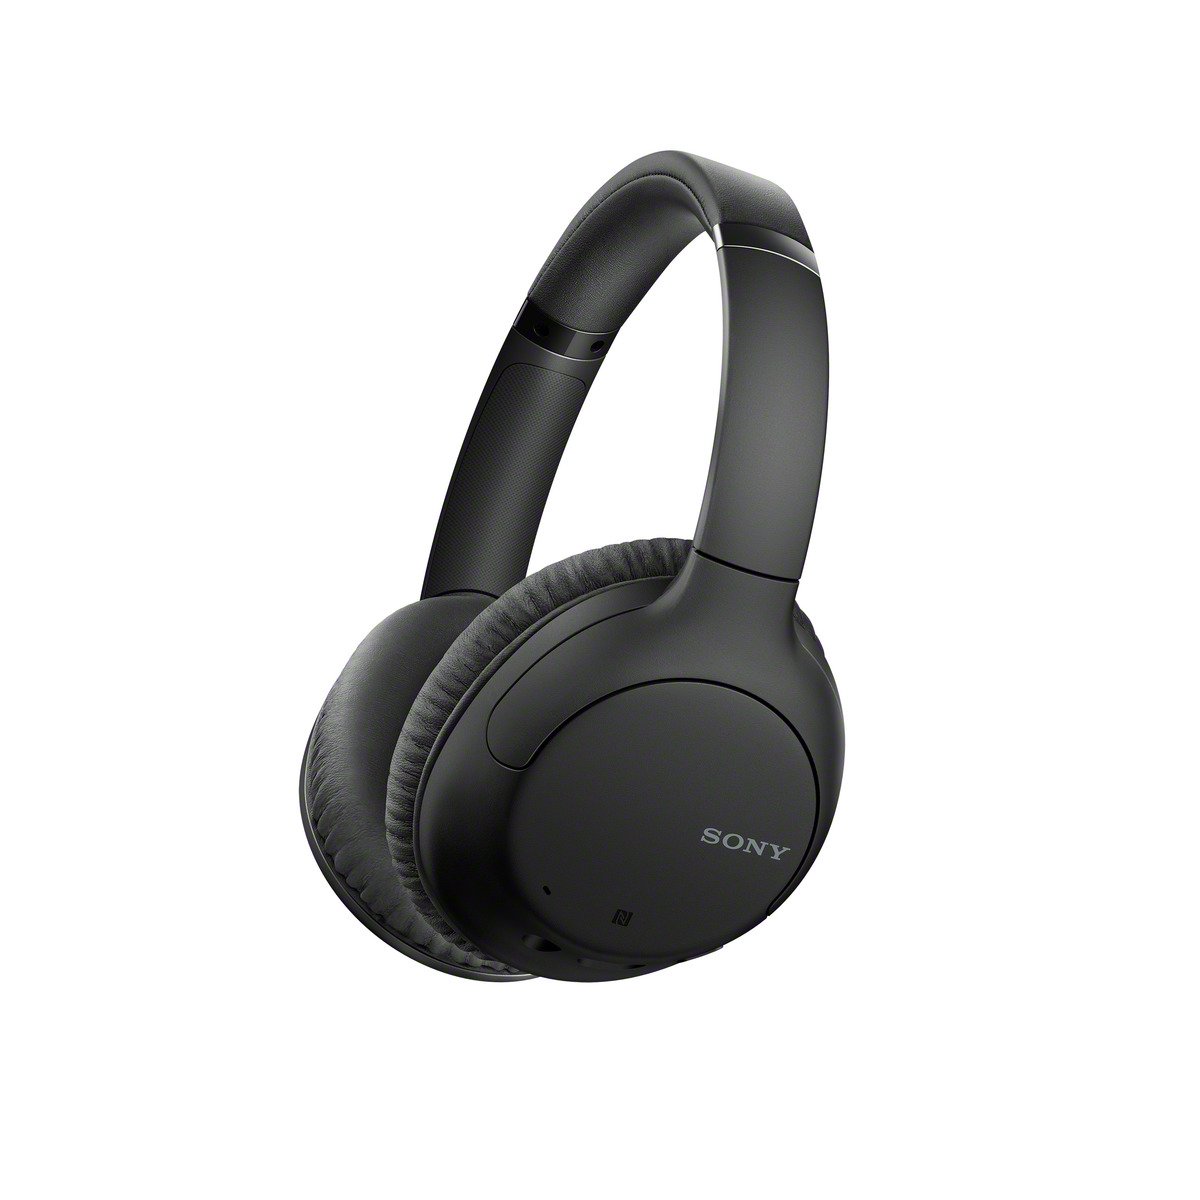 Sony Wireless Over-Ear Headphone with Noise Cancellation WH-CH710N Black